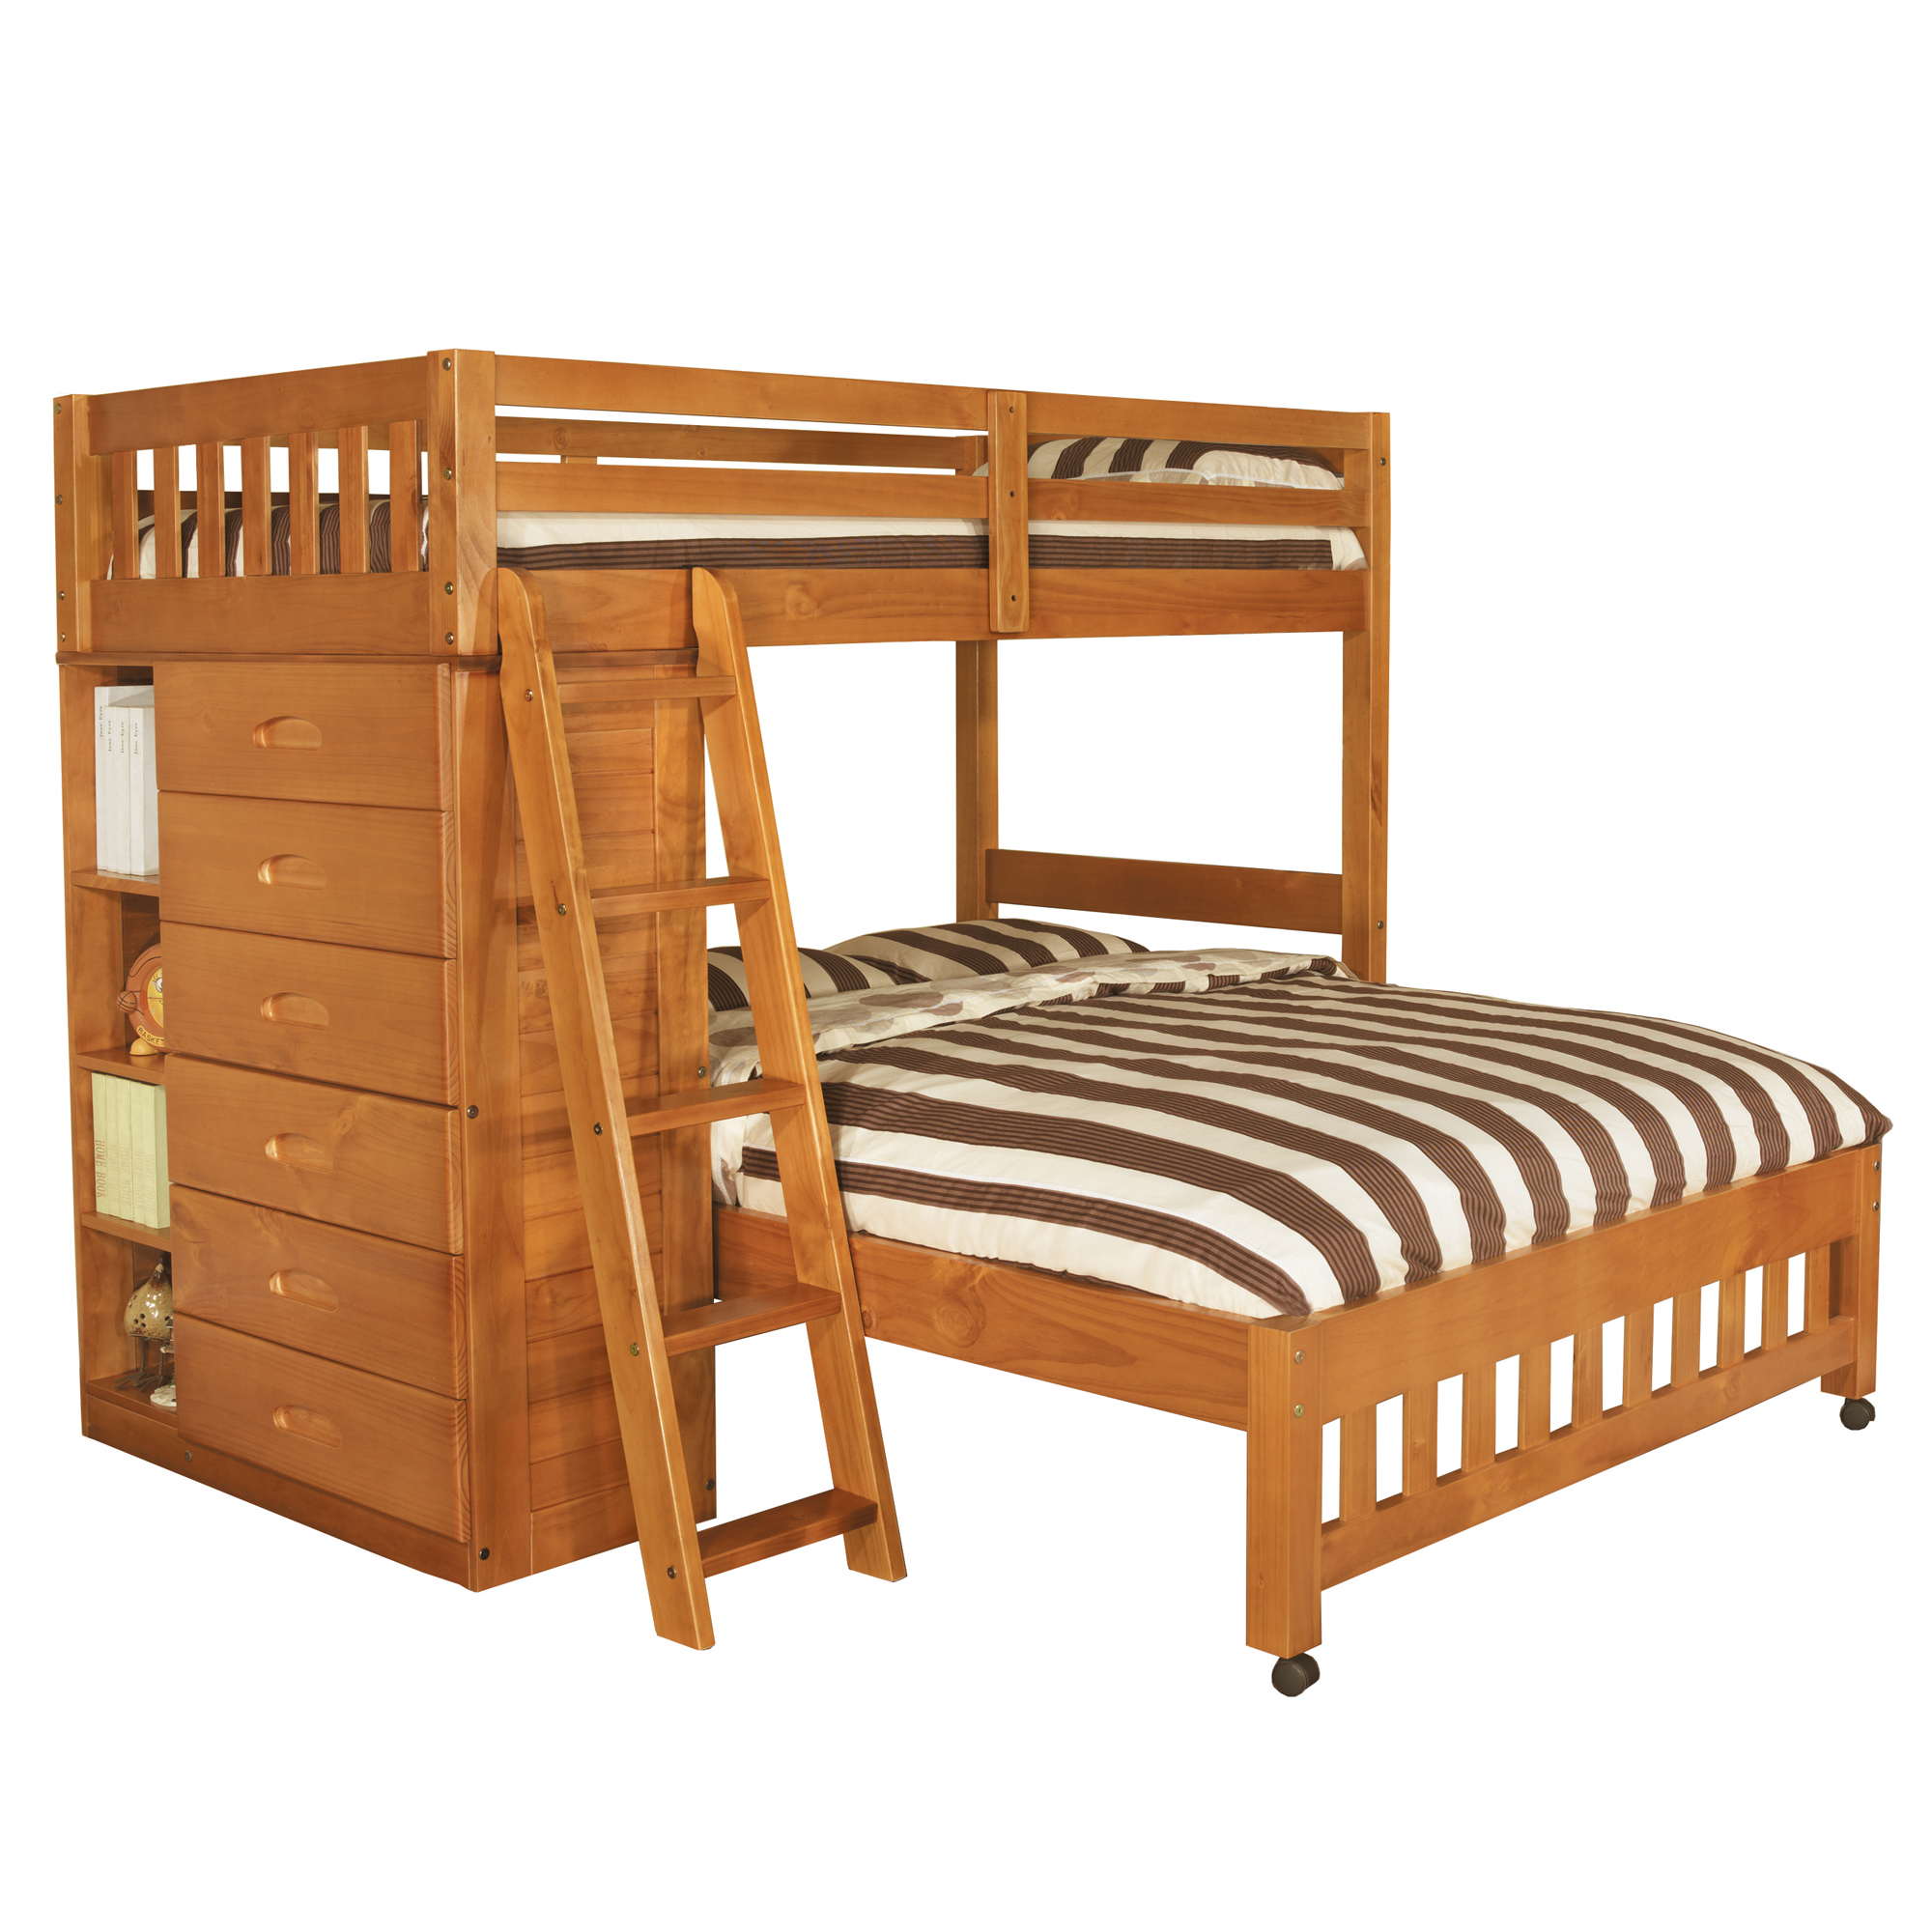 Discovery World Furniture Honey Twin, Viv And Rae Bunk Bed Reviews